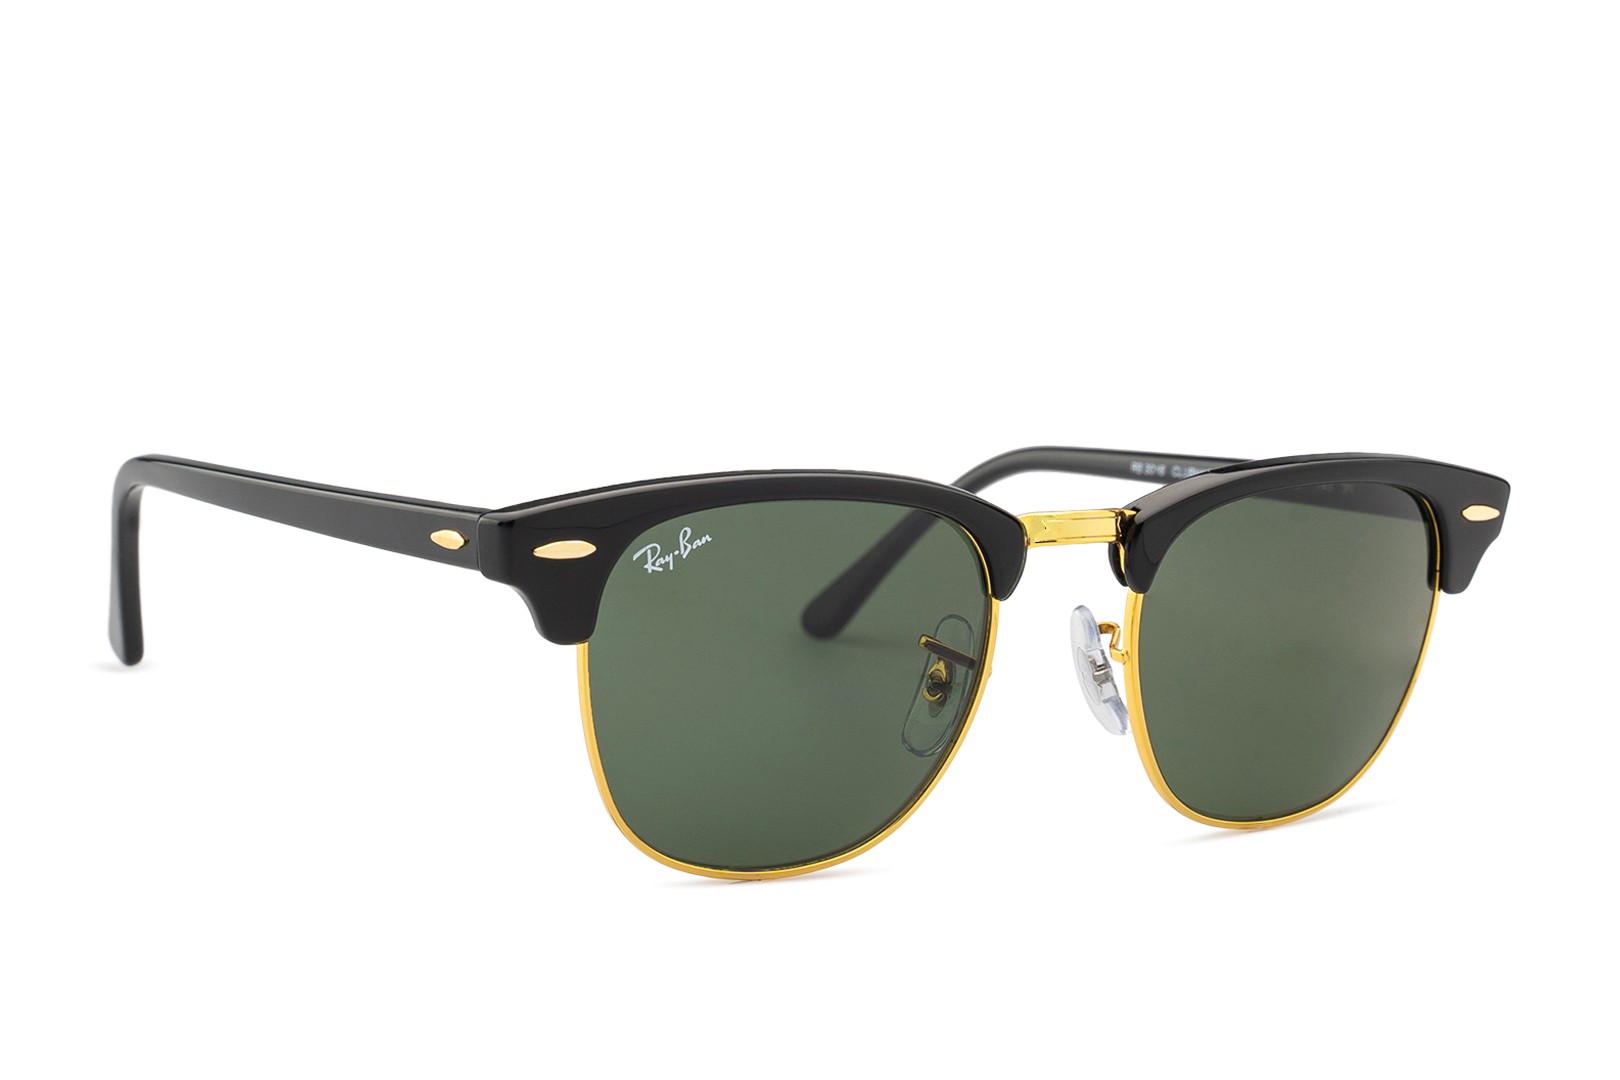 Bungalow amplification furniture Ray-Ban® Clubmaster RB3016 W0365 | Lentiamo